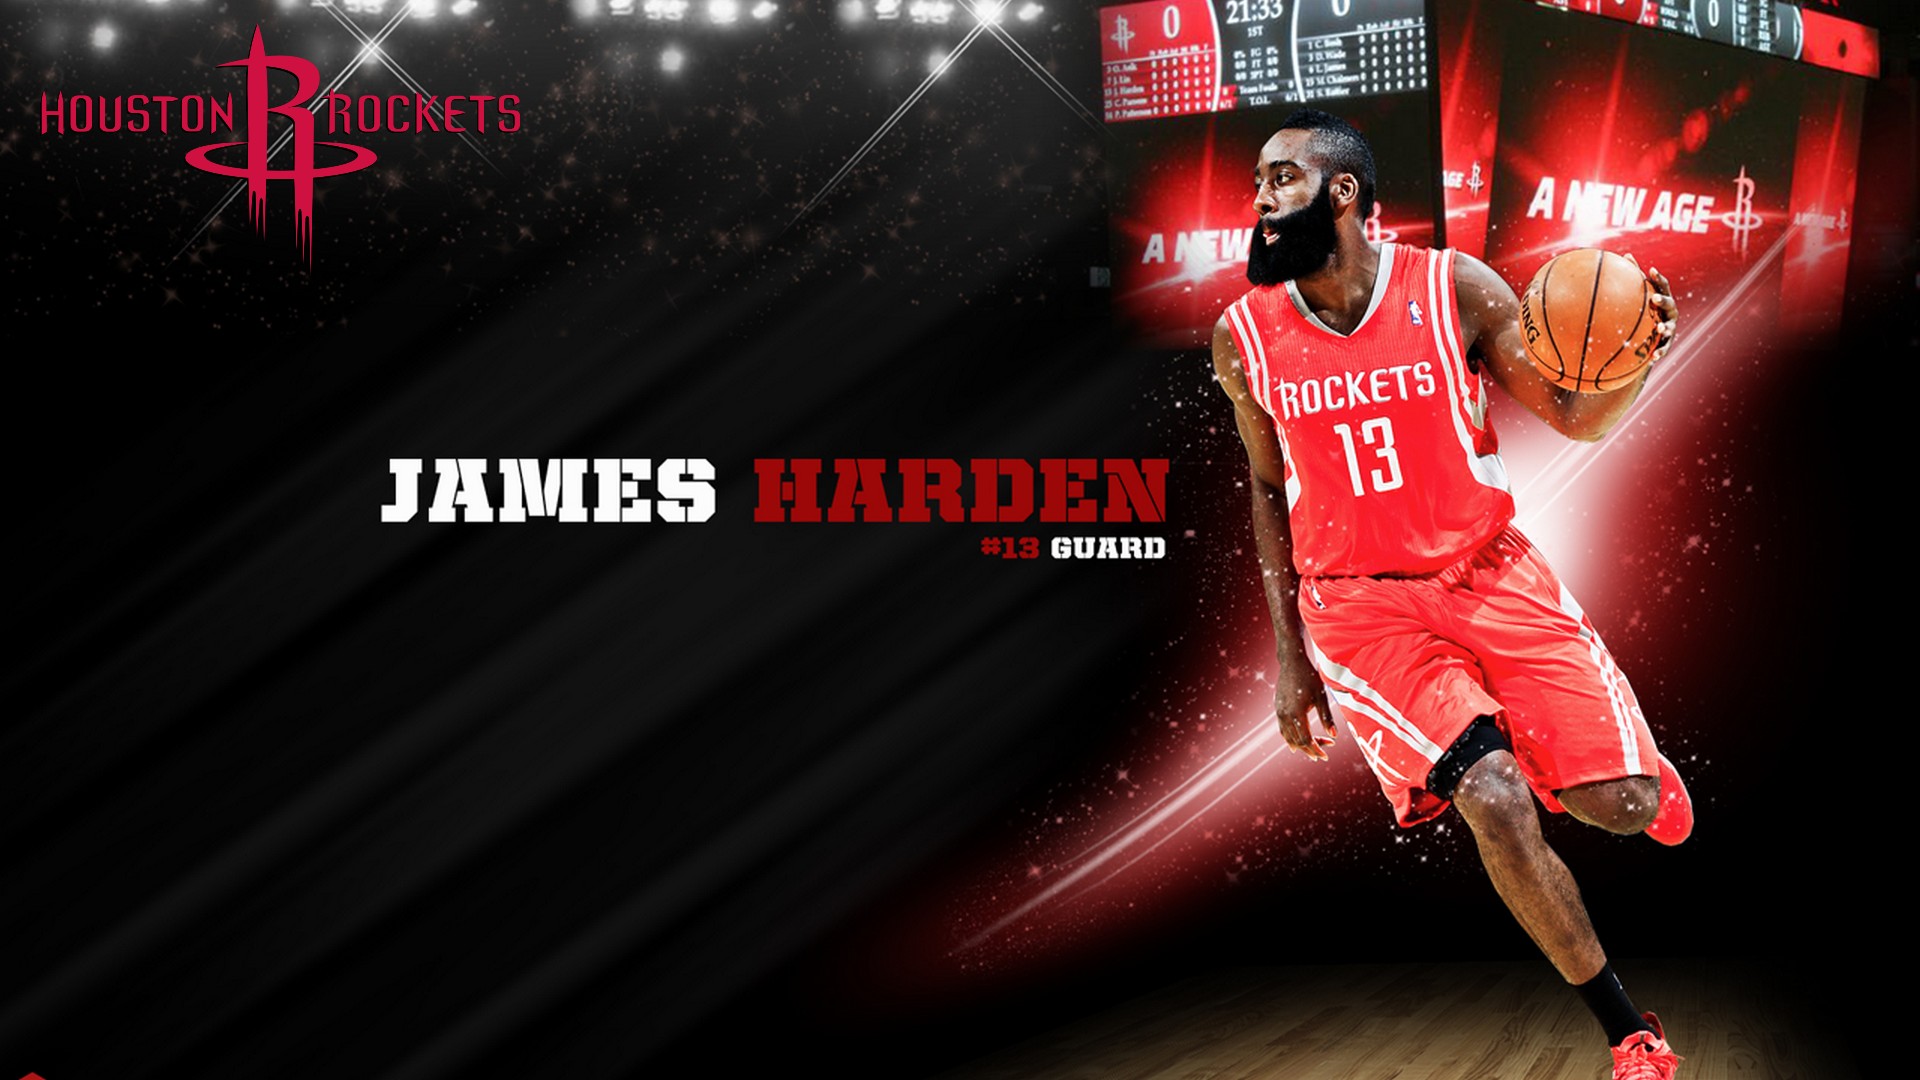 Wallpapers HD James Harden Beard with image dimensions 1920x1080 pixel. You can make this wallpaper for your Desktop Computer Backgrounds, Windows or Mac Screensavers, iPhone Lock screen, Tablet or Android and another Mobile Phone device